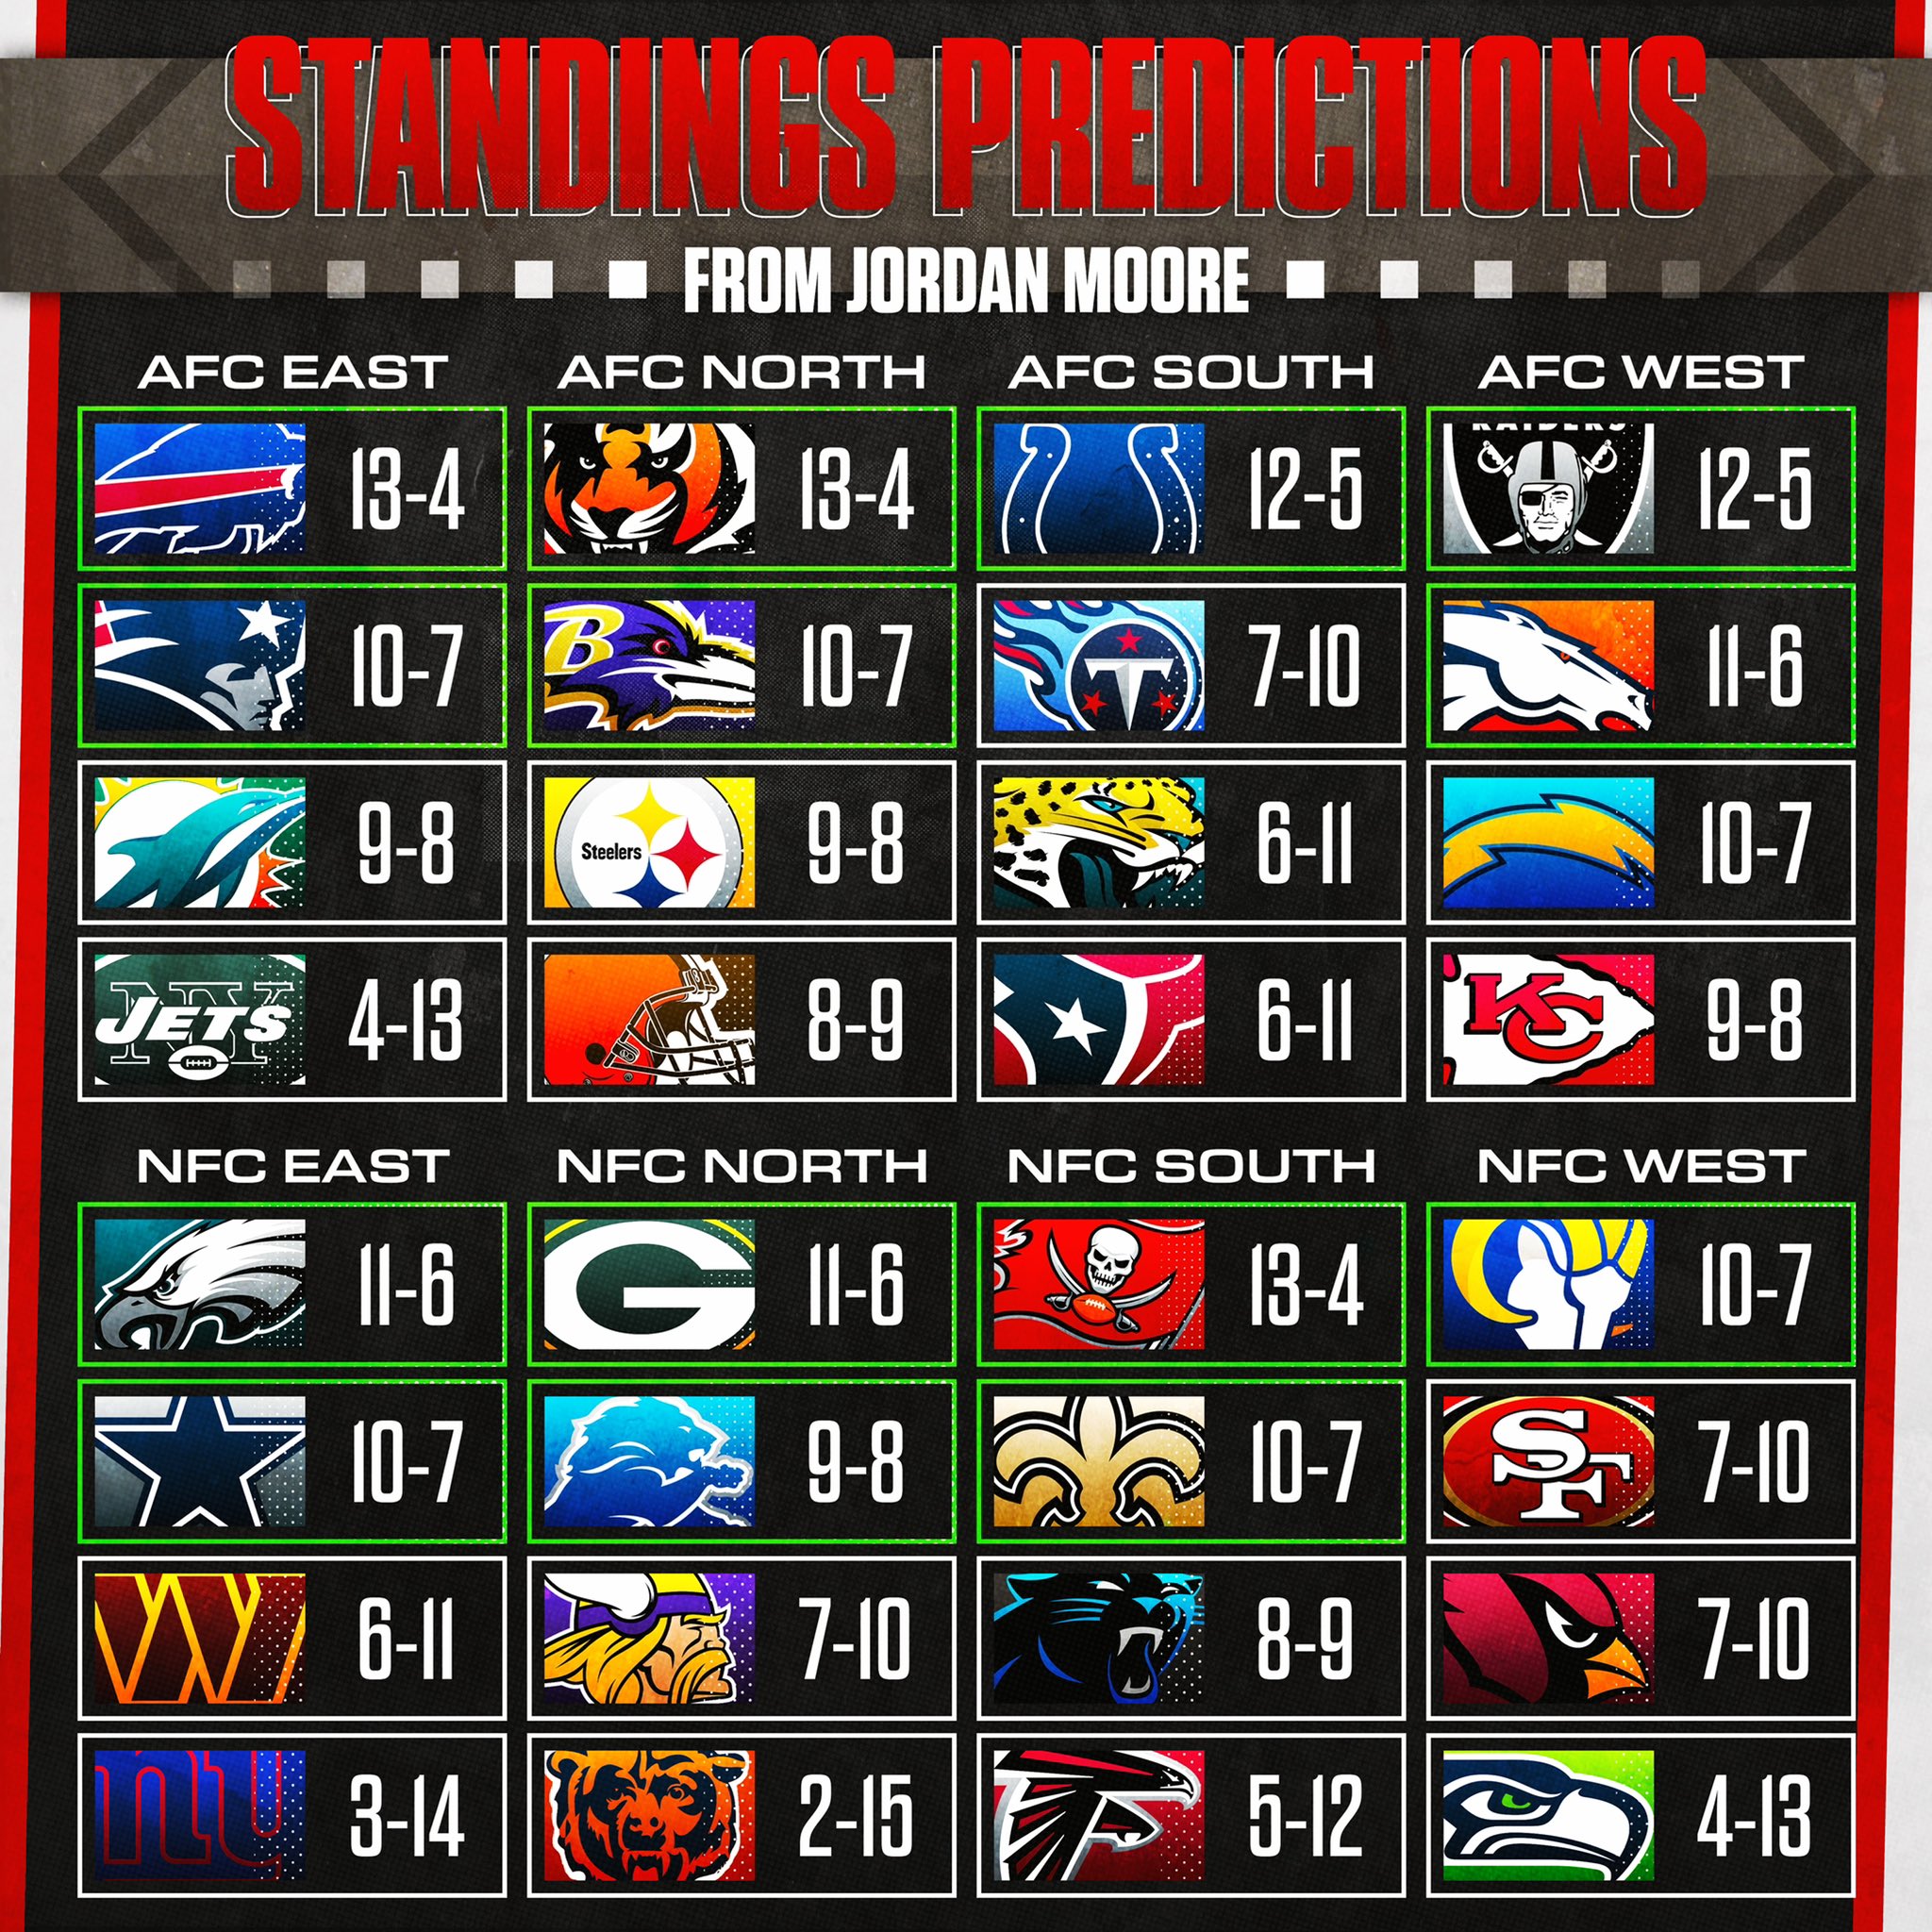 nfl standing projections 2022